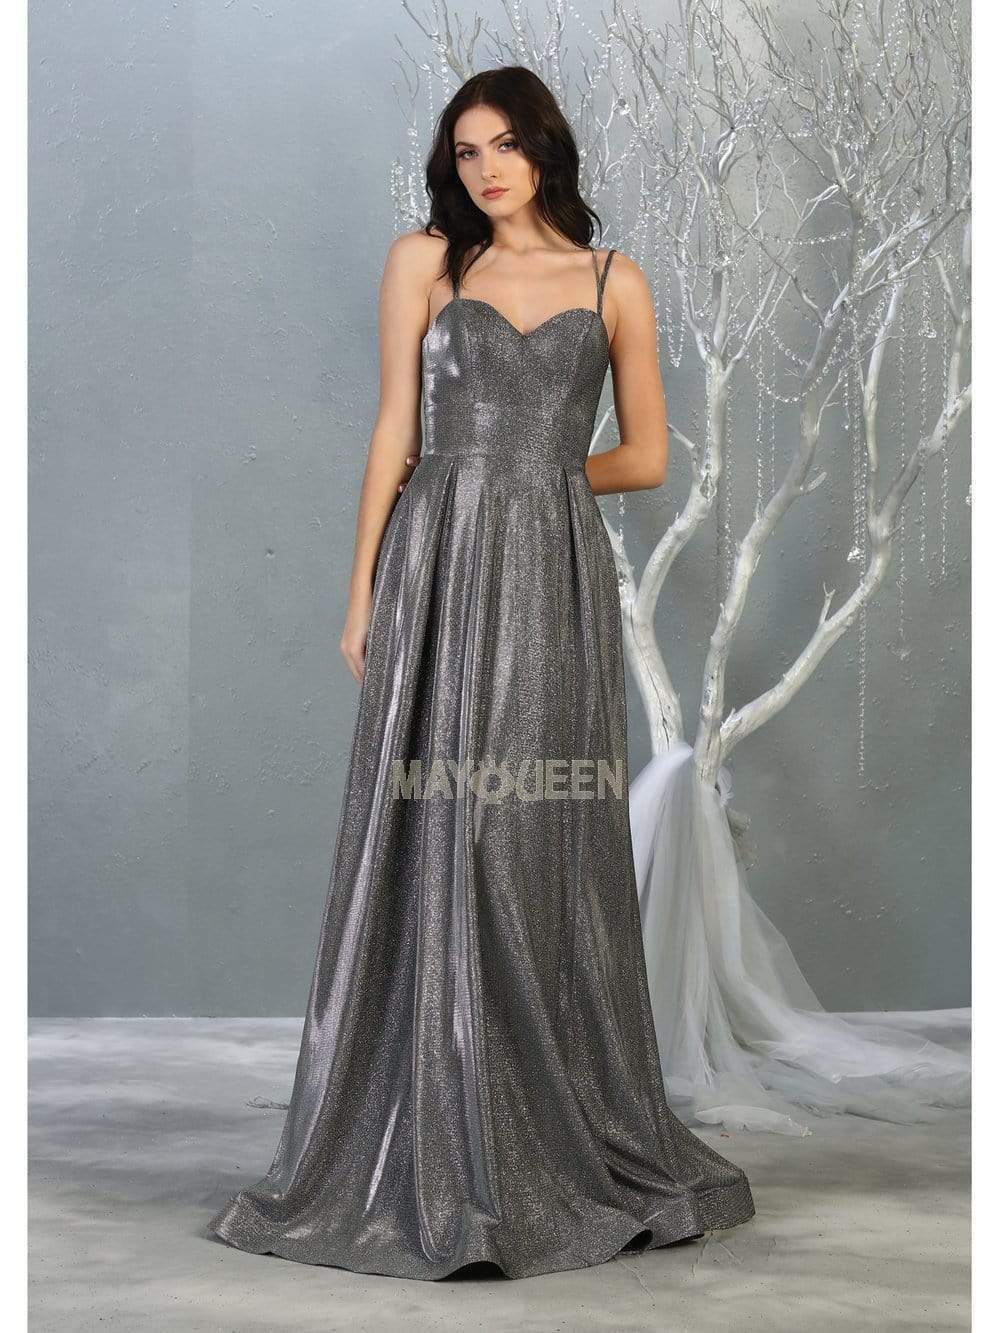 May Queen - MQ1760 Strappy Sweetheart Bodice A-Line Dress Evening Dresses 4 / Charcoal Gray